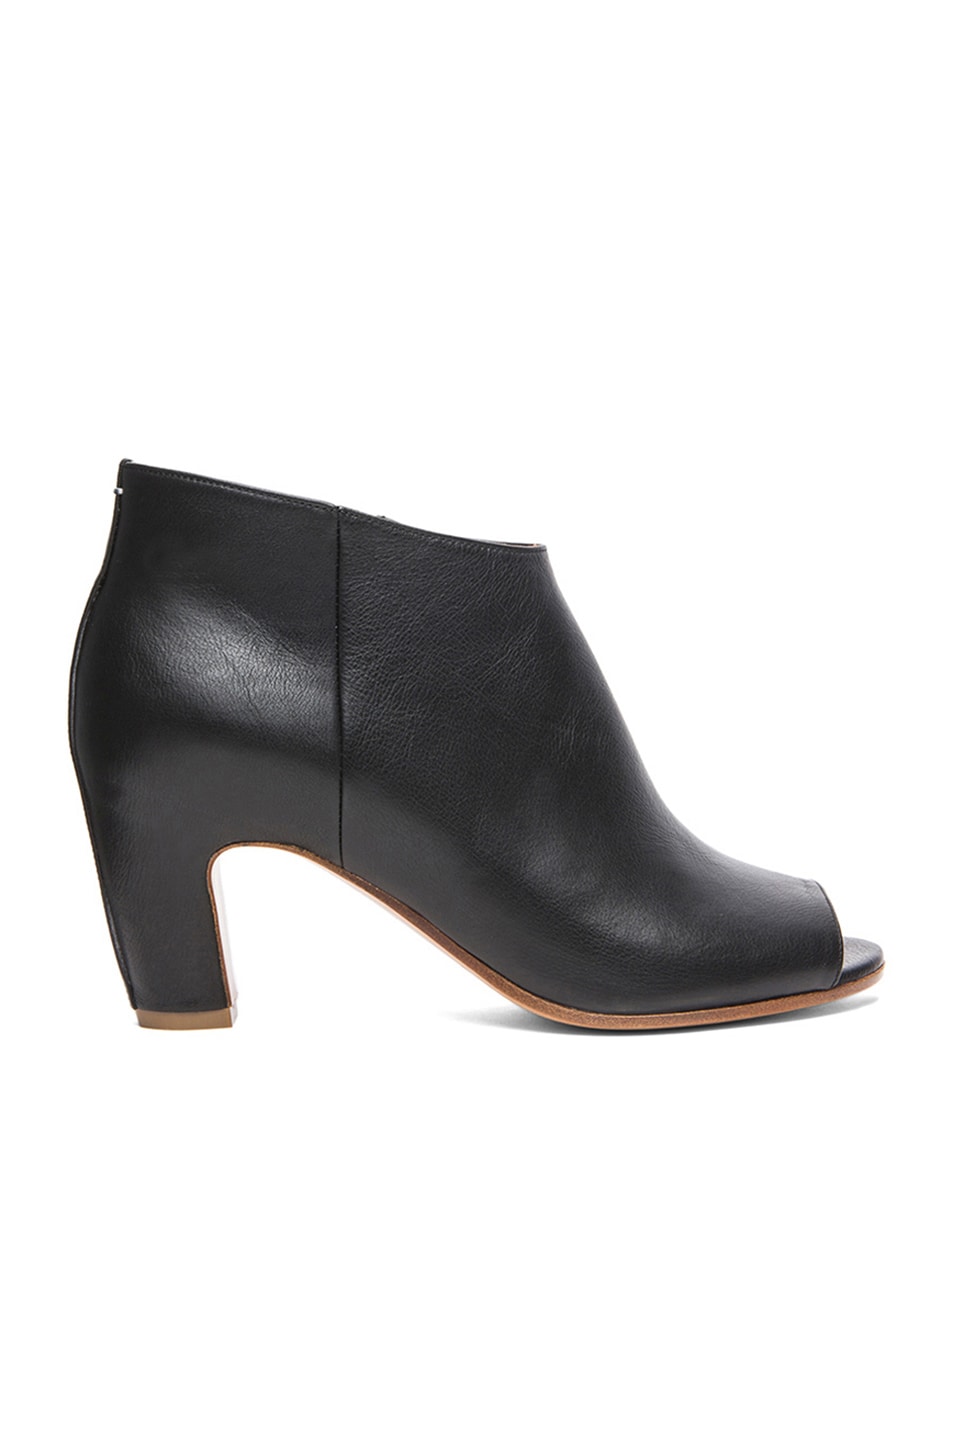 Image 1 of Maison Margiela Open Toe Leather Booties in Black